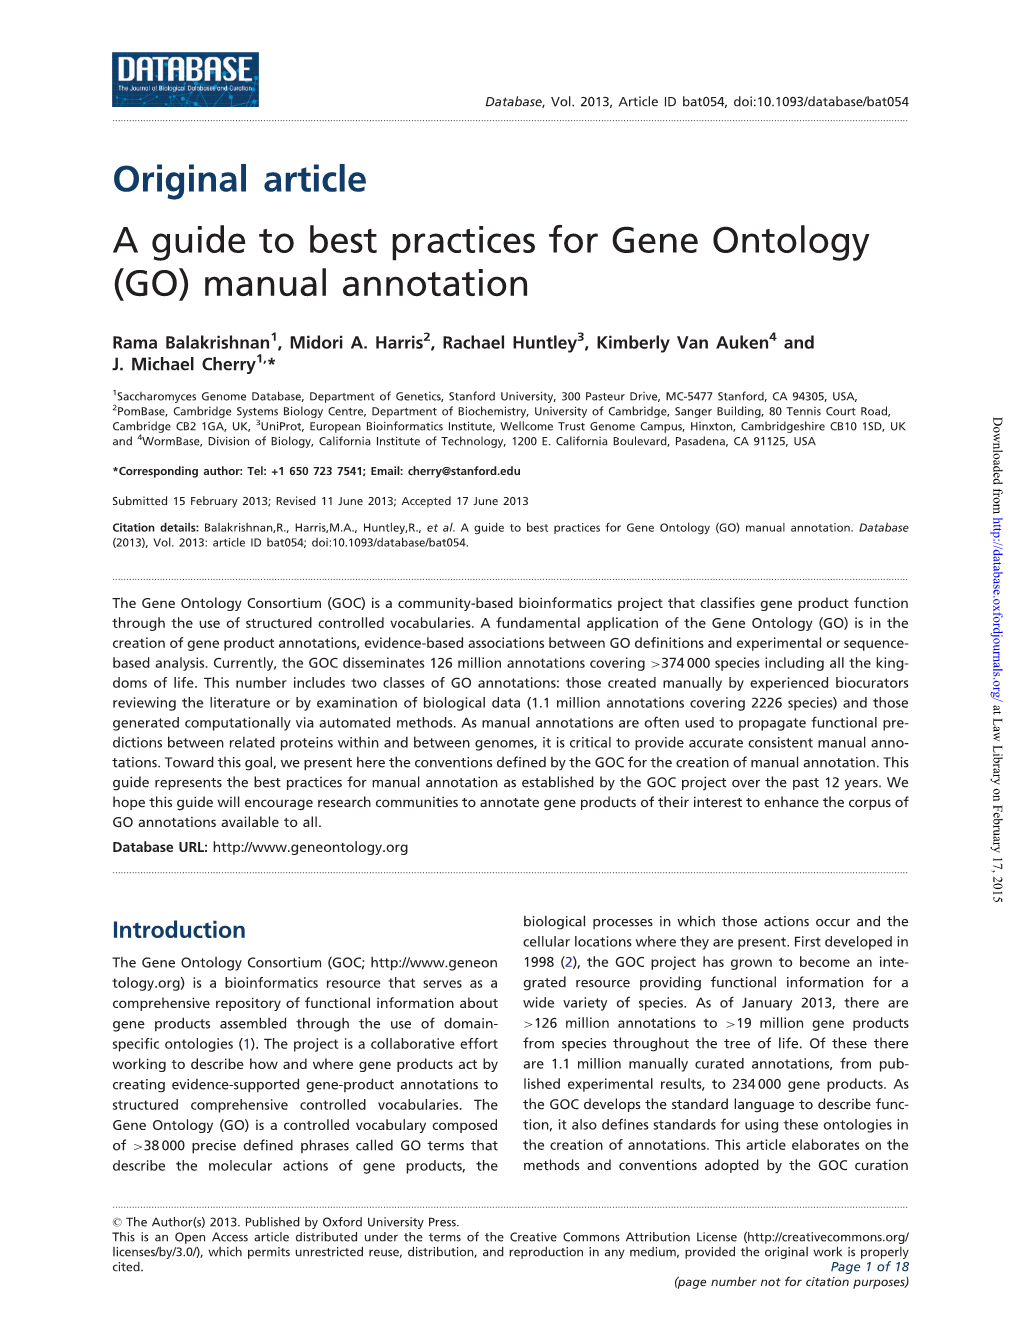 Original Article a Guide to Best Practices for Gene Ontology (GO) Manual Annotation